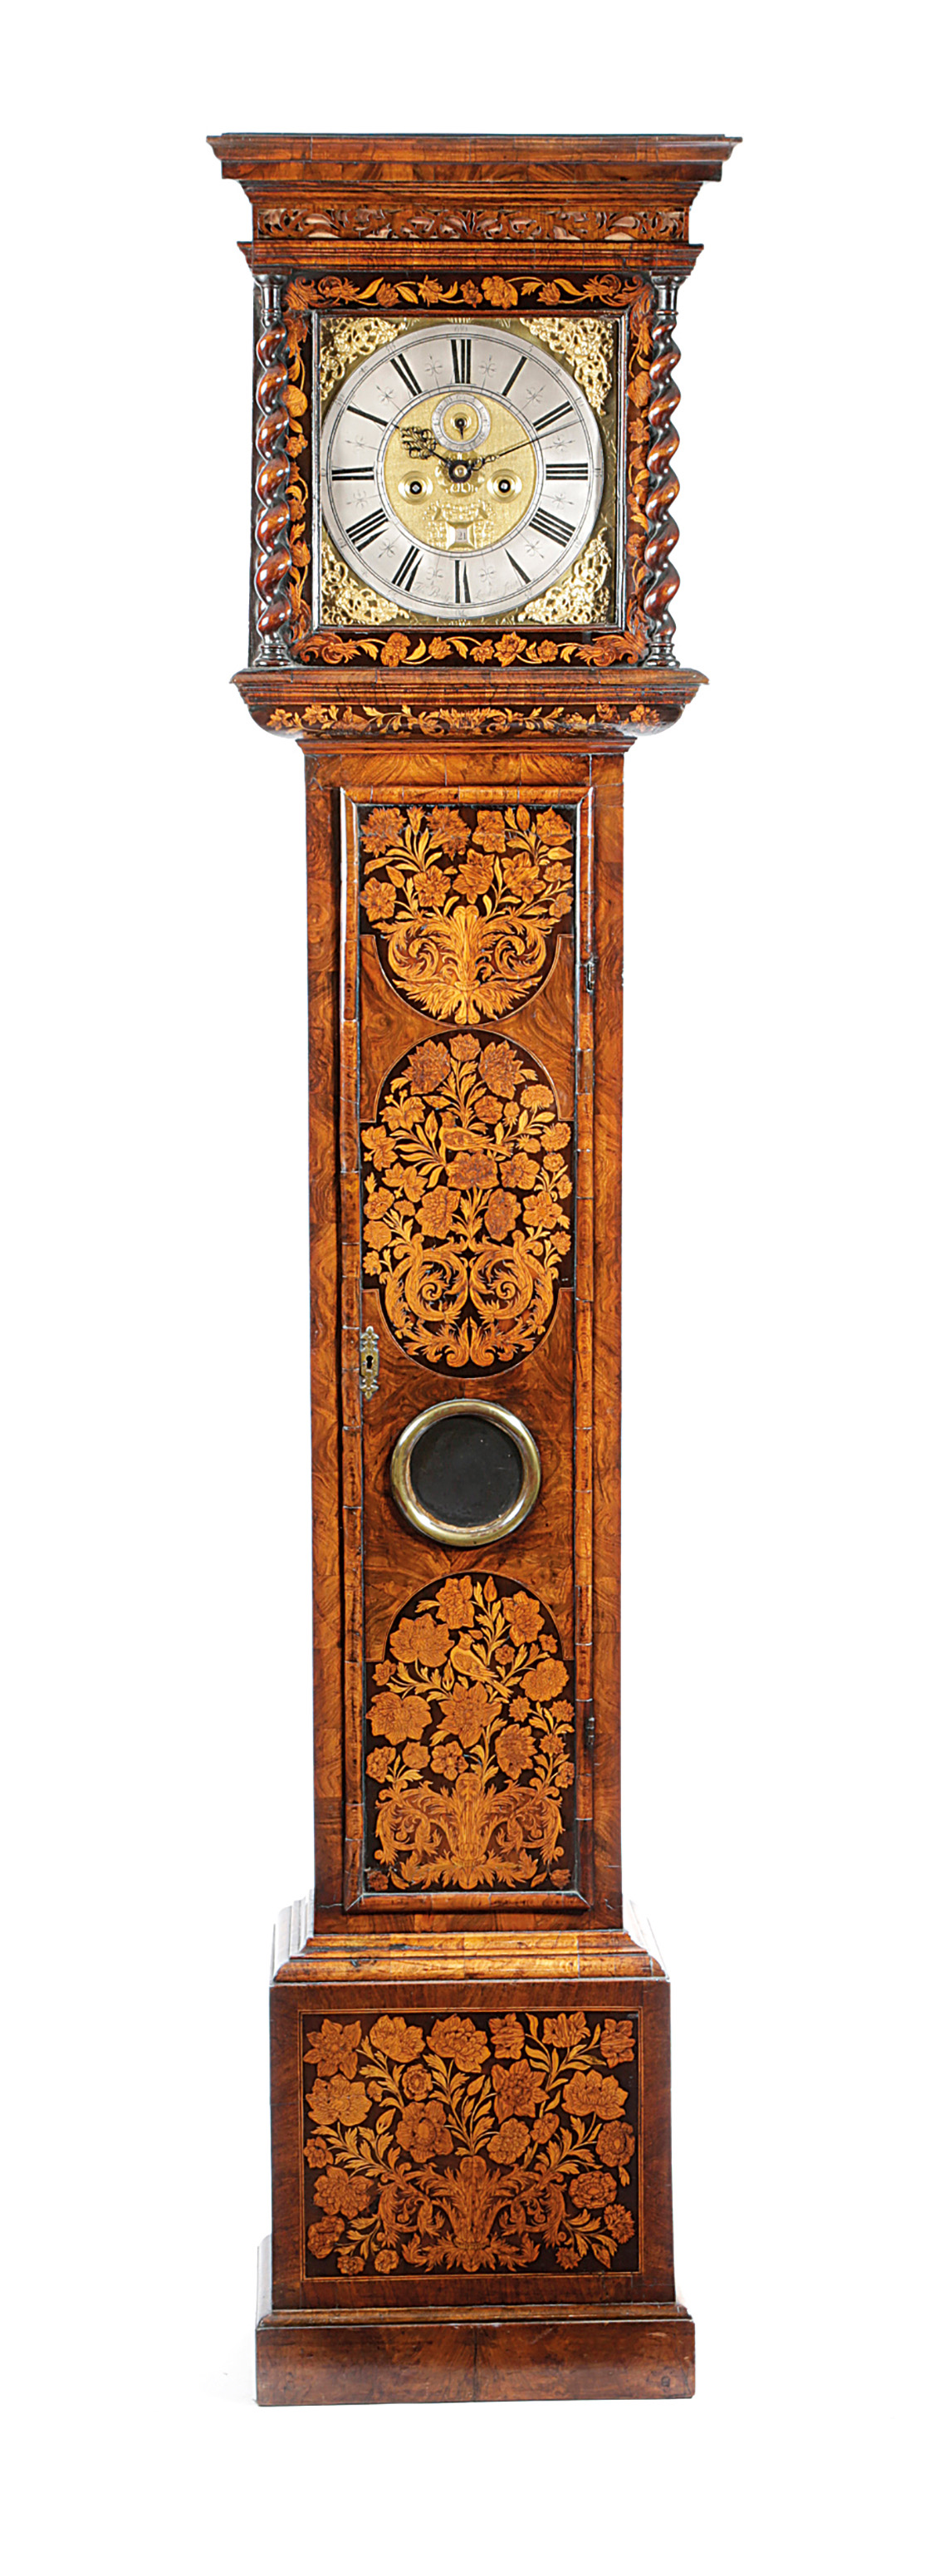 A WILLIAM AND MARY WALNUT AND MARQUETRY LONGCASE CLOCK BY THOMAS BRIDGE LONDON, C.1700 the brass